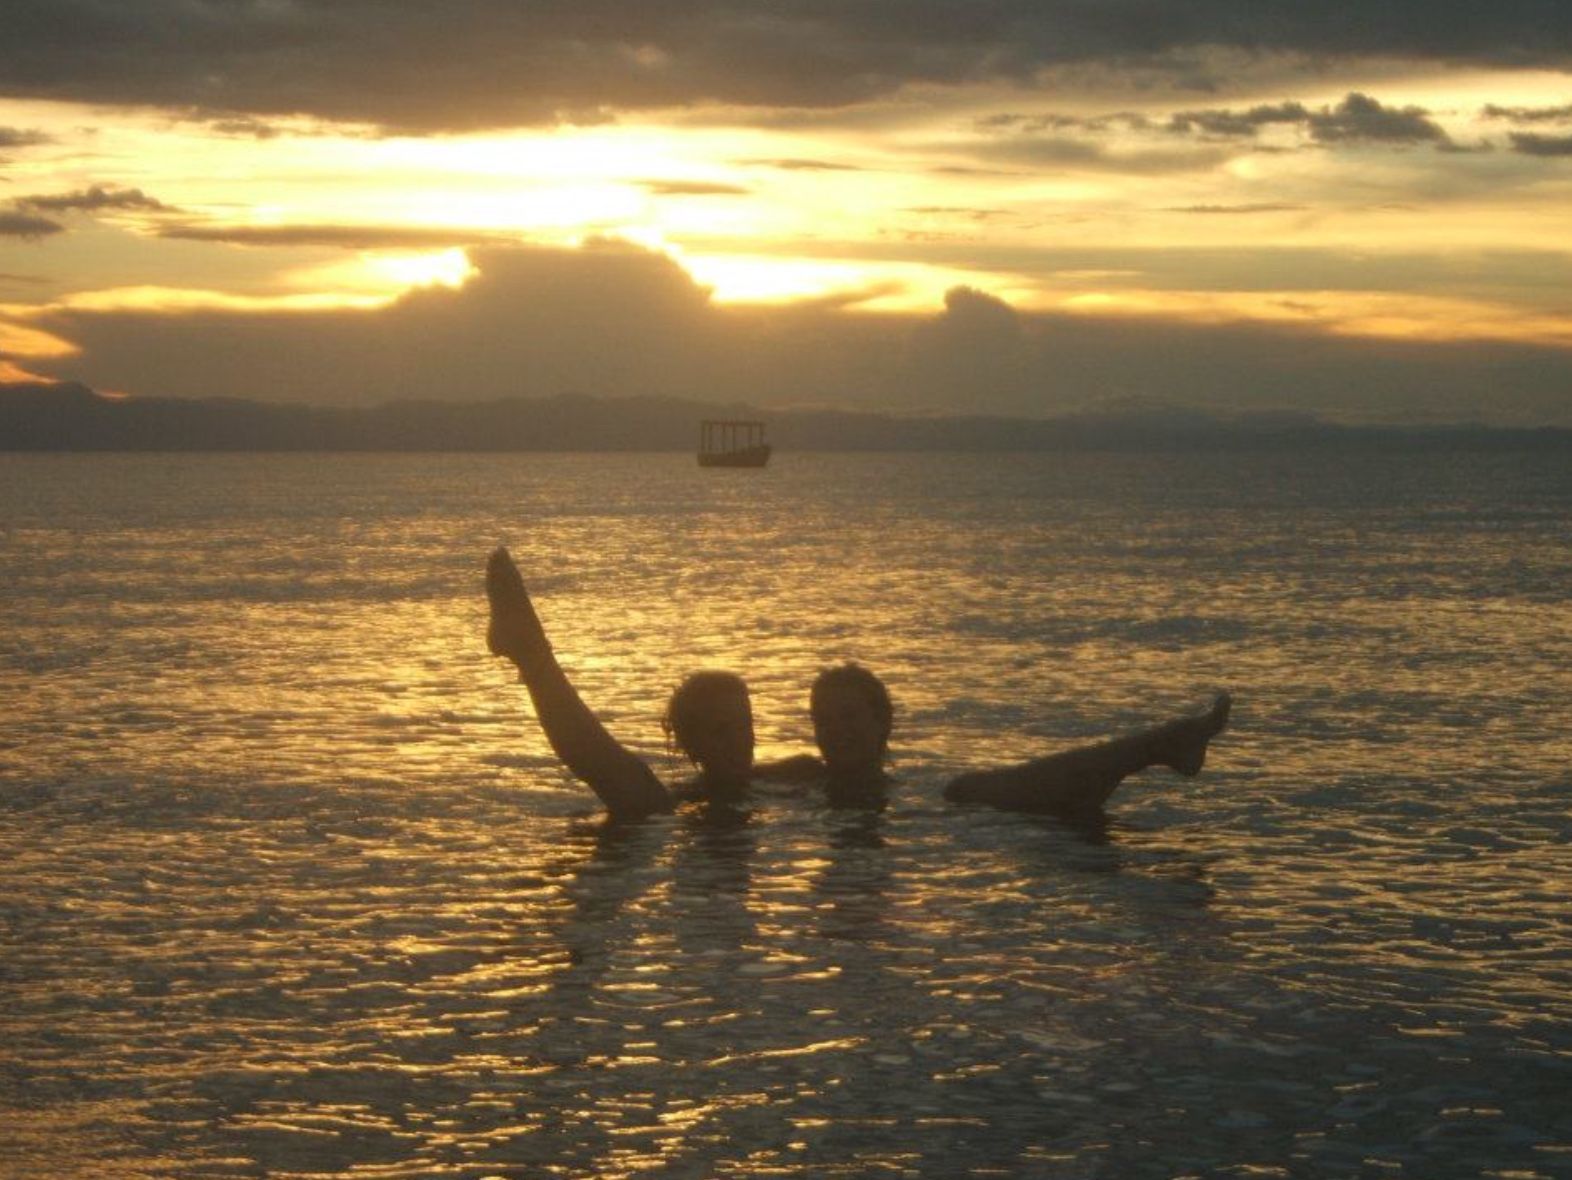 Relax in the sea on your Gap Year